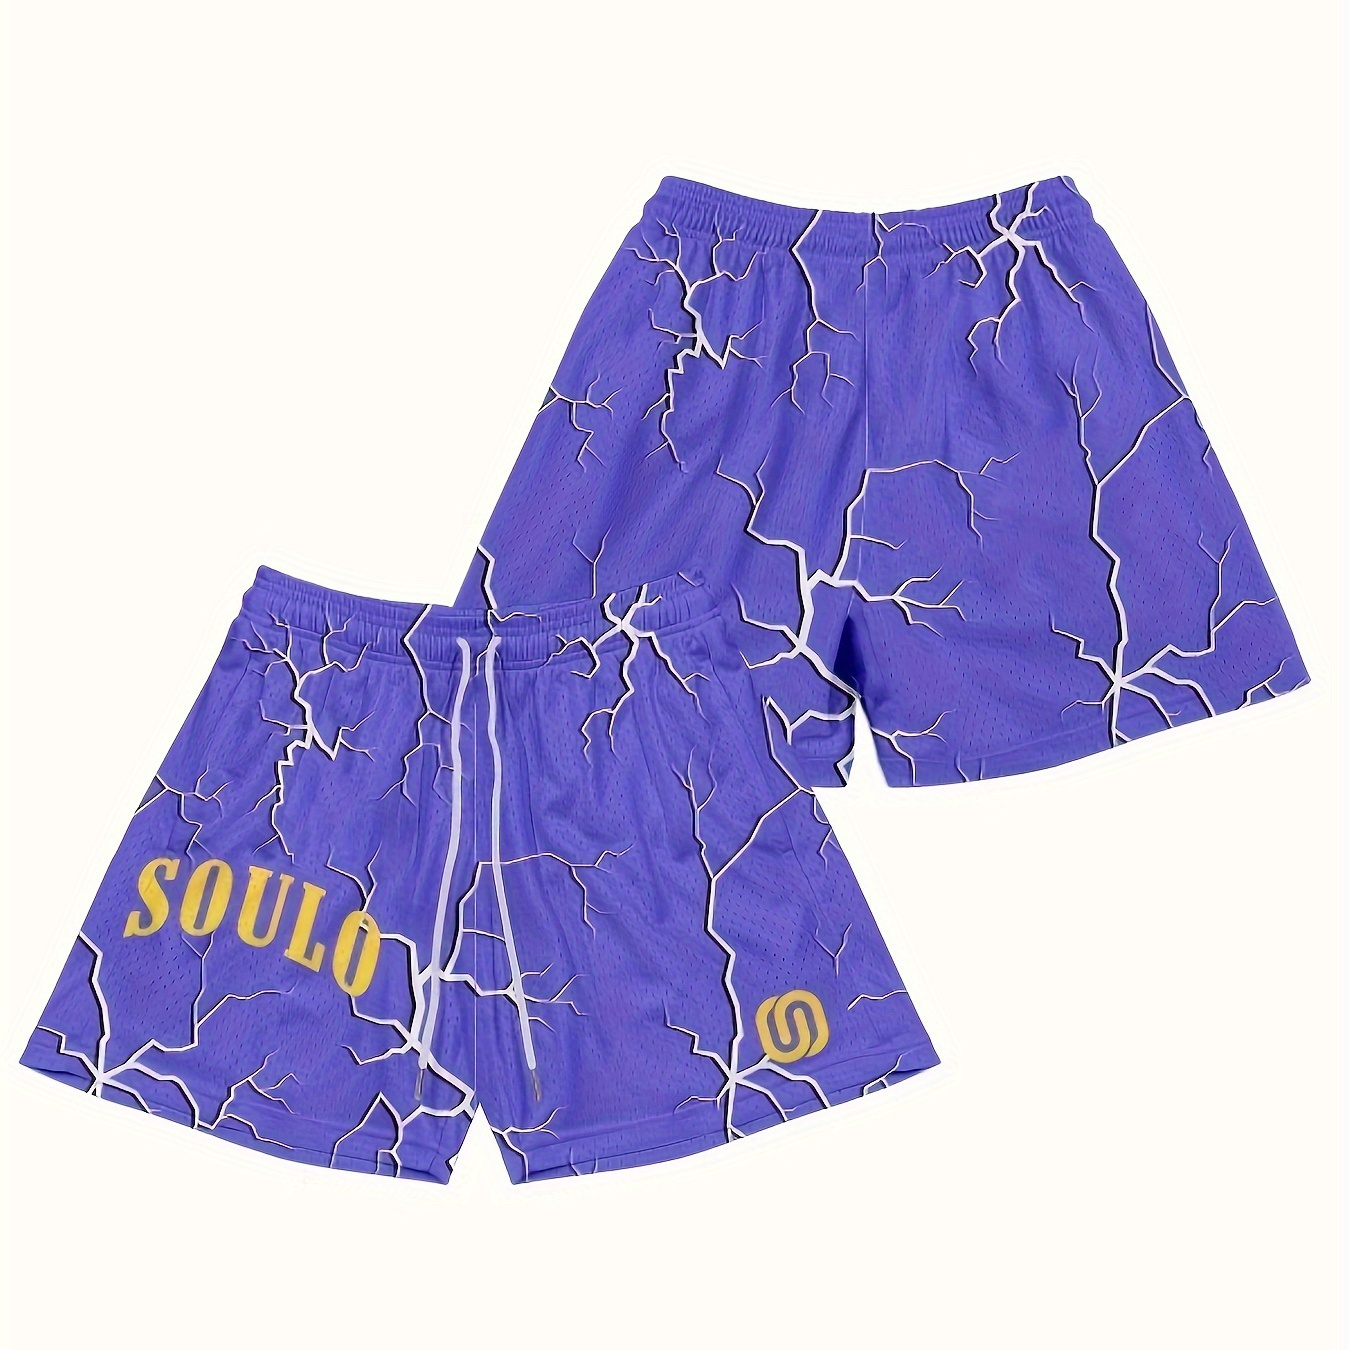 

Soulo Marble Print Casual Mesh Shorts, 5 Inches Inseam Basketball & Beach Shorts, Summer Clothes Streetwear Outfits Sports Running Gym Workout For Men Women